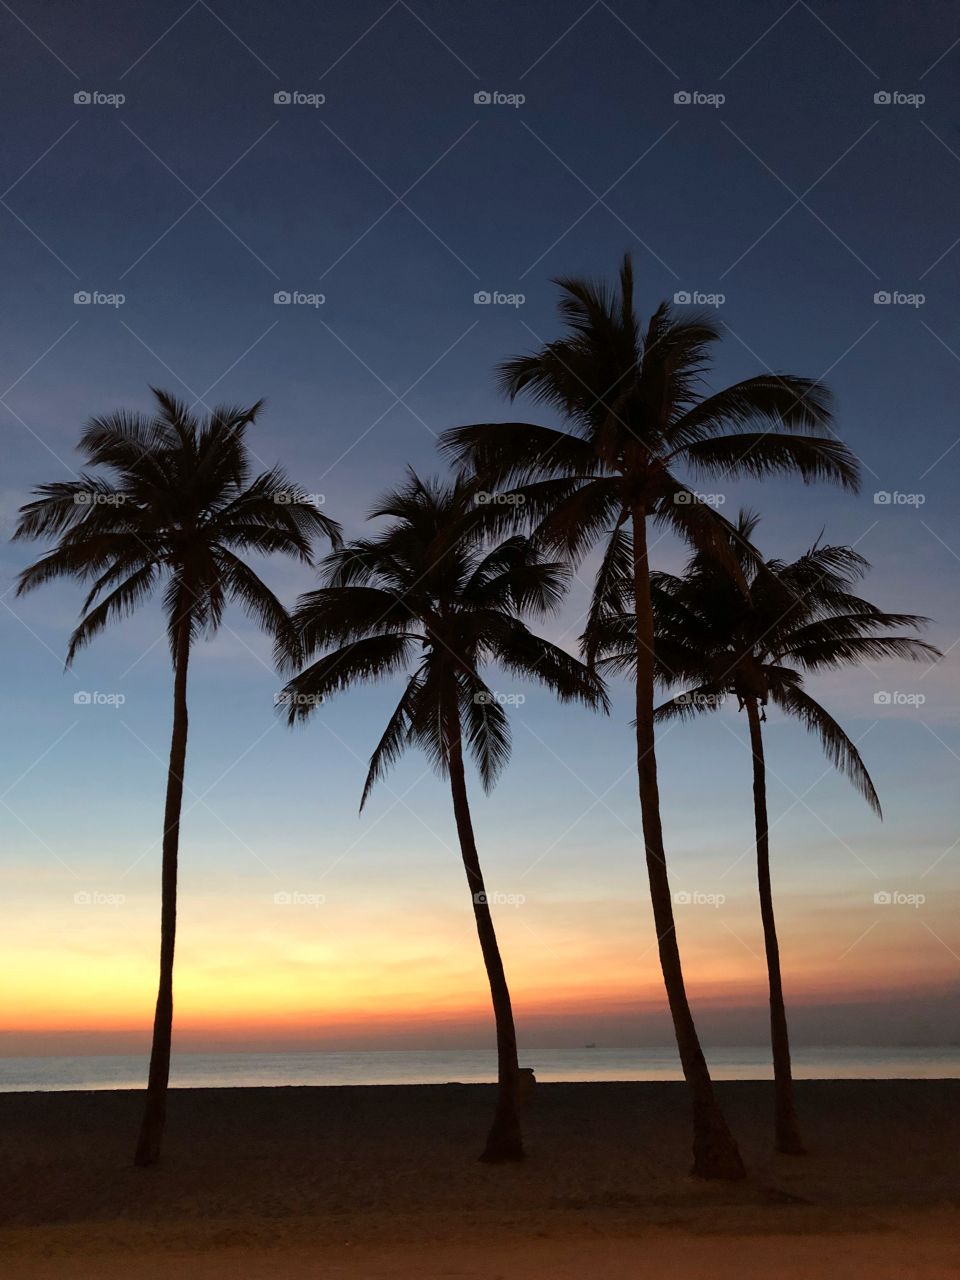 For silhouetted palm trees against the colorful  sunrise at Hollywood Beach Florida 